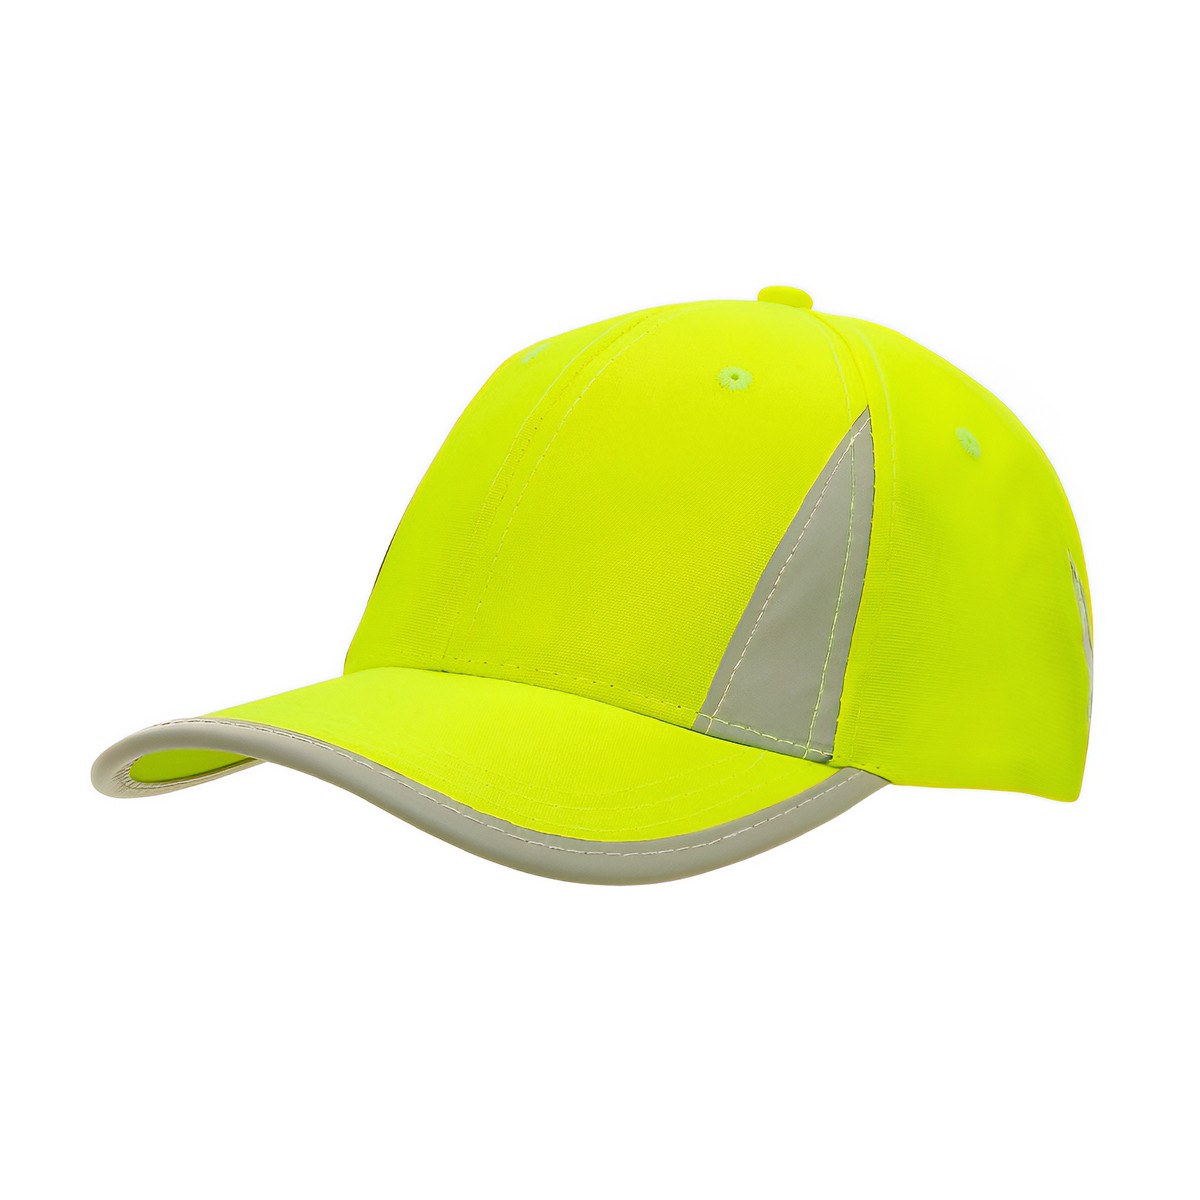 SAFETY CAP YELLOW